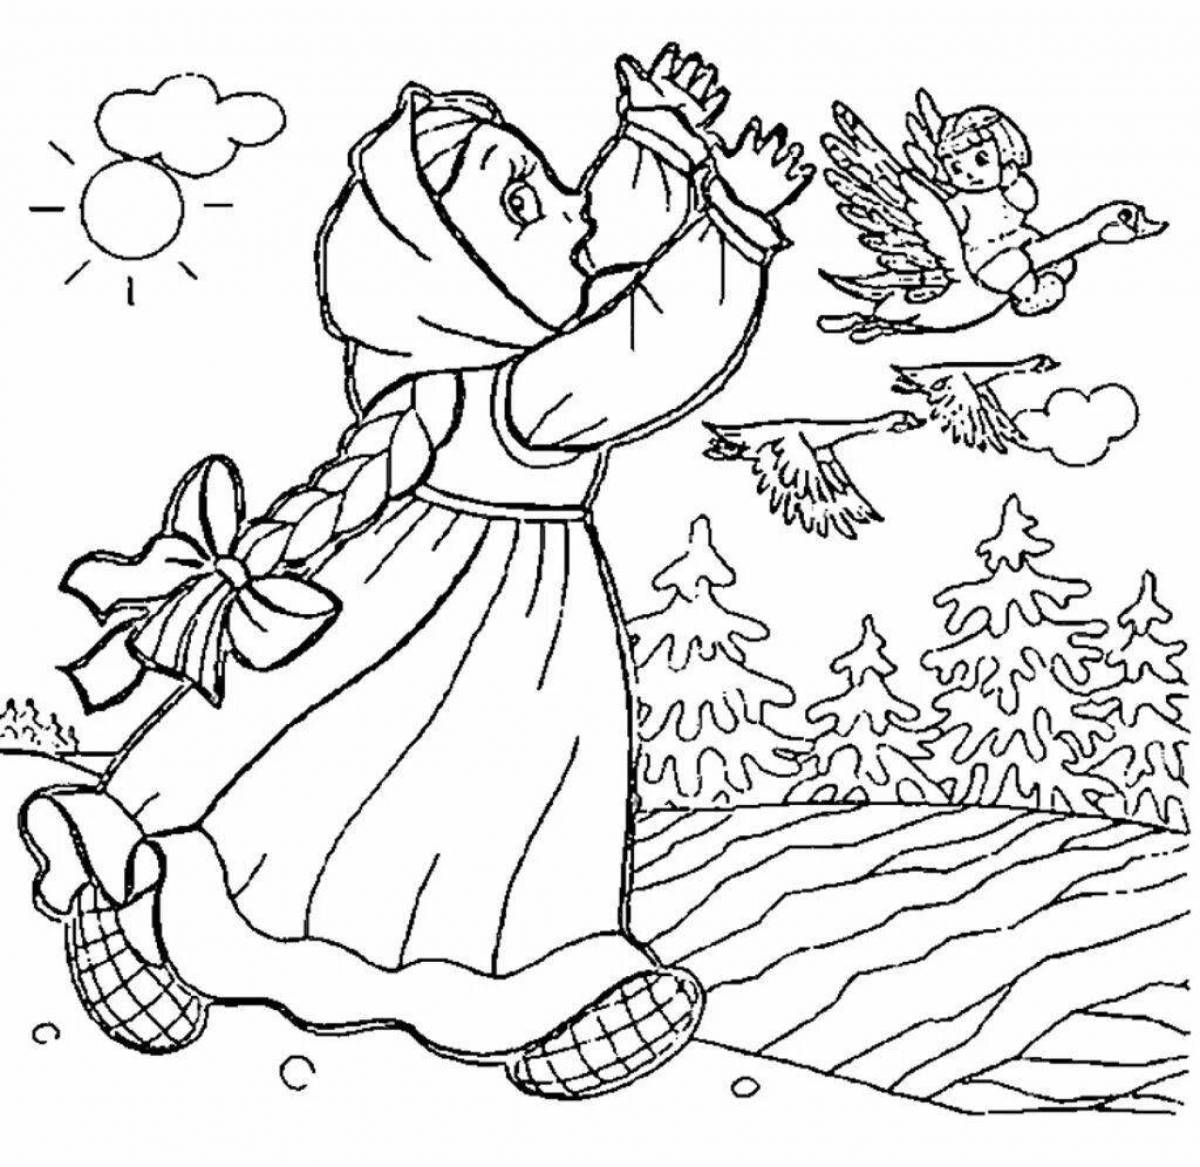 Playful swan geese coloring page for kids